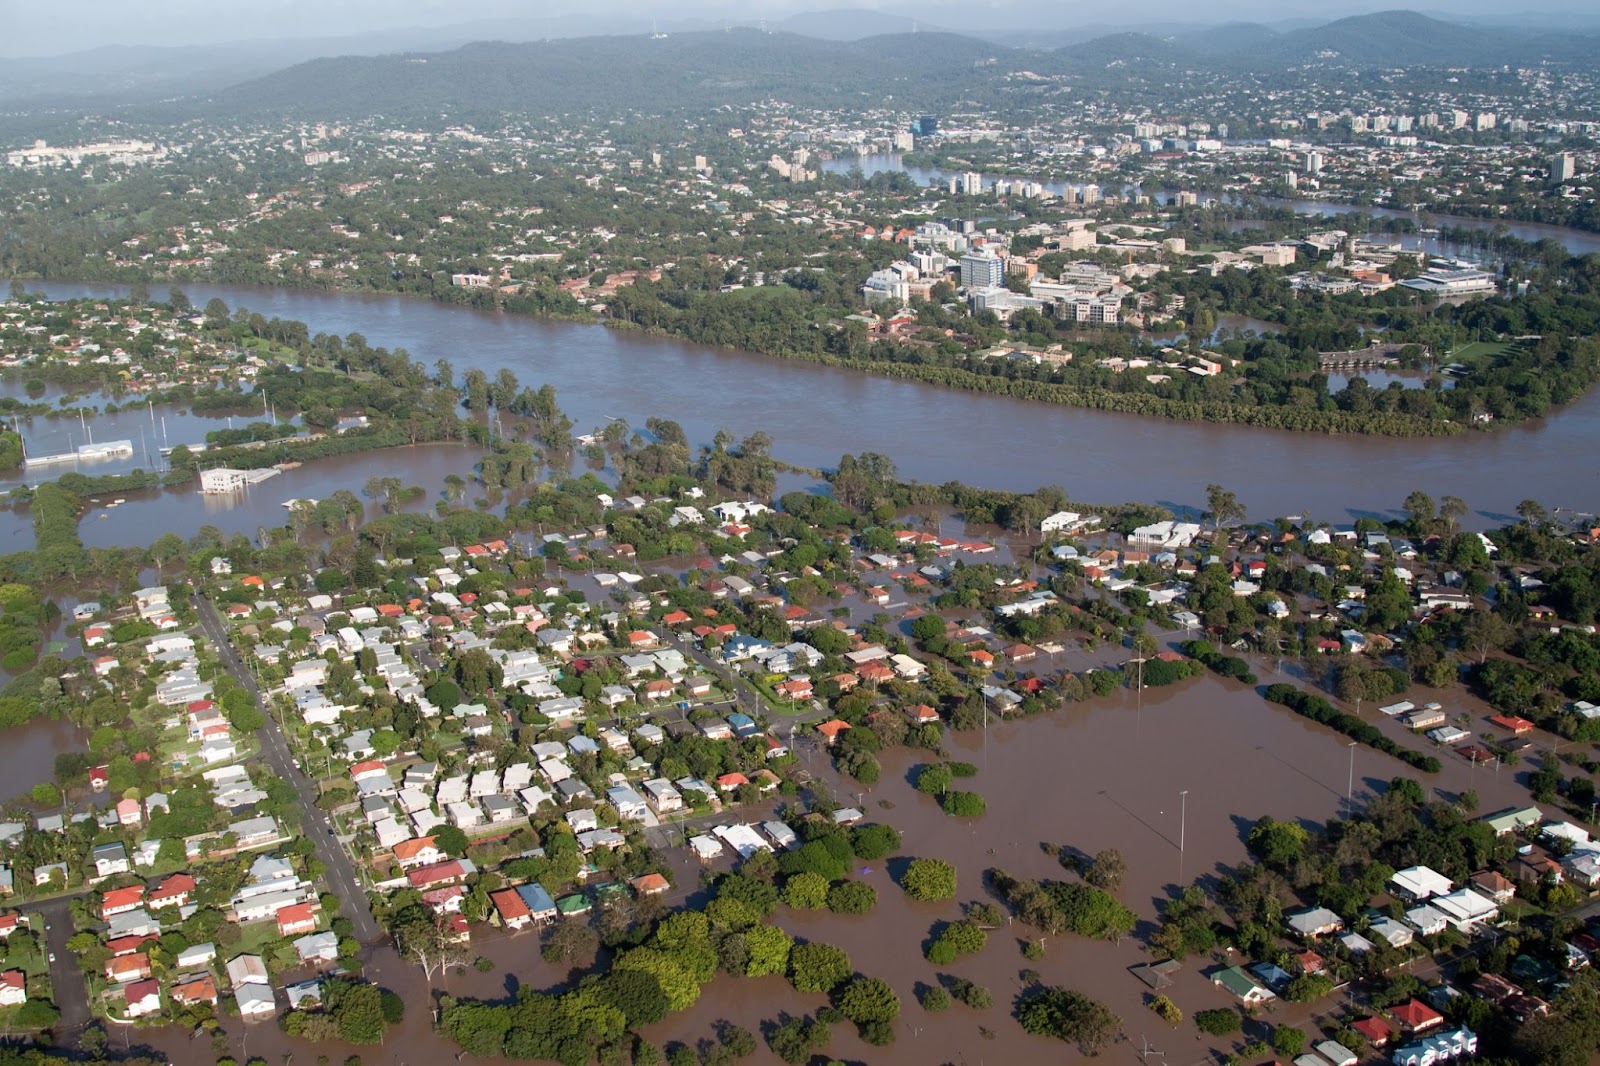 Sadly many areas in New South Wales and Queensland have experienced flooding in recent weeks